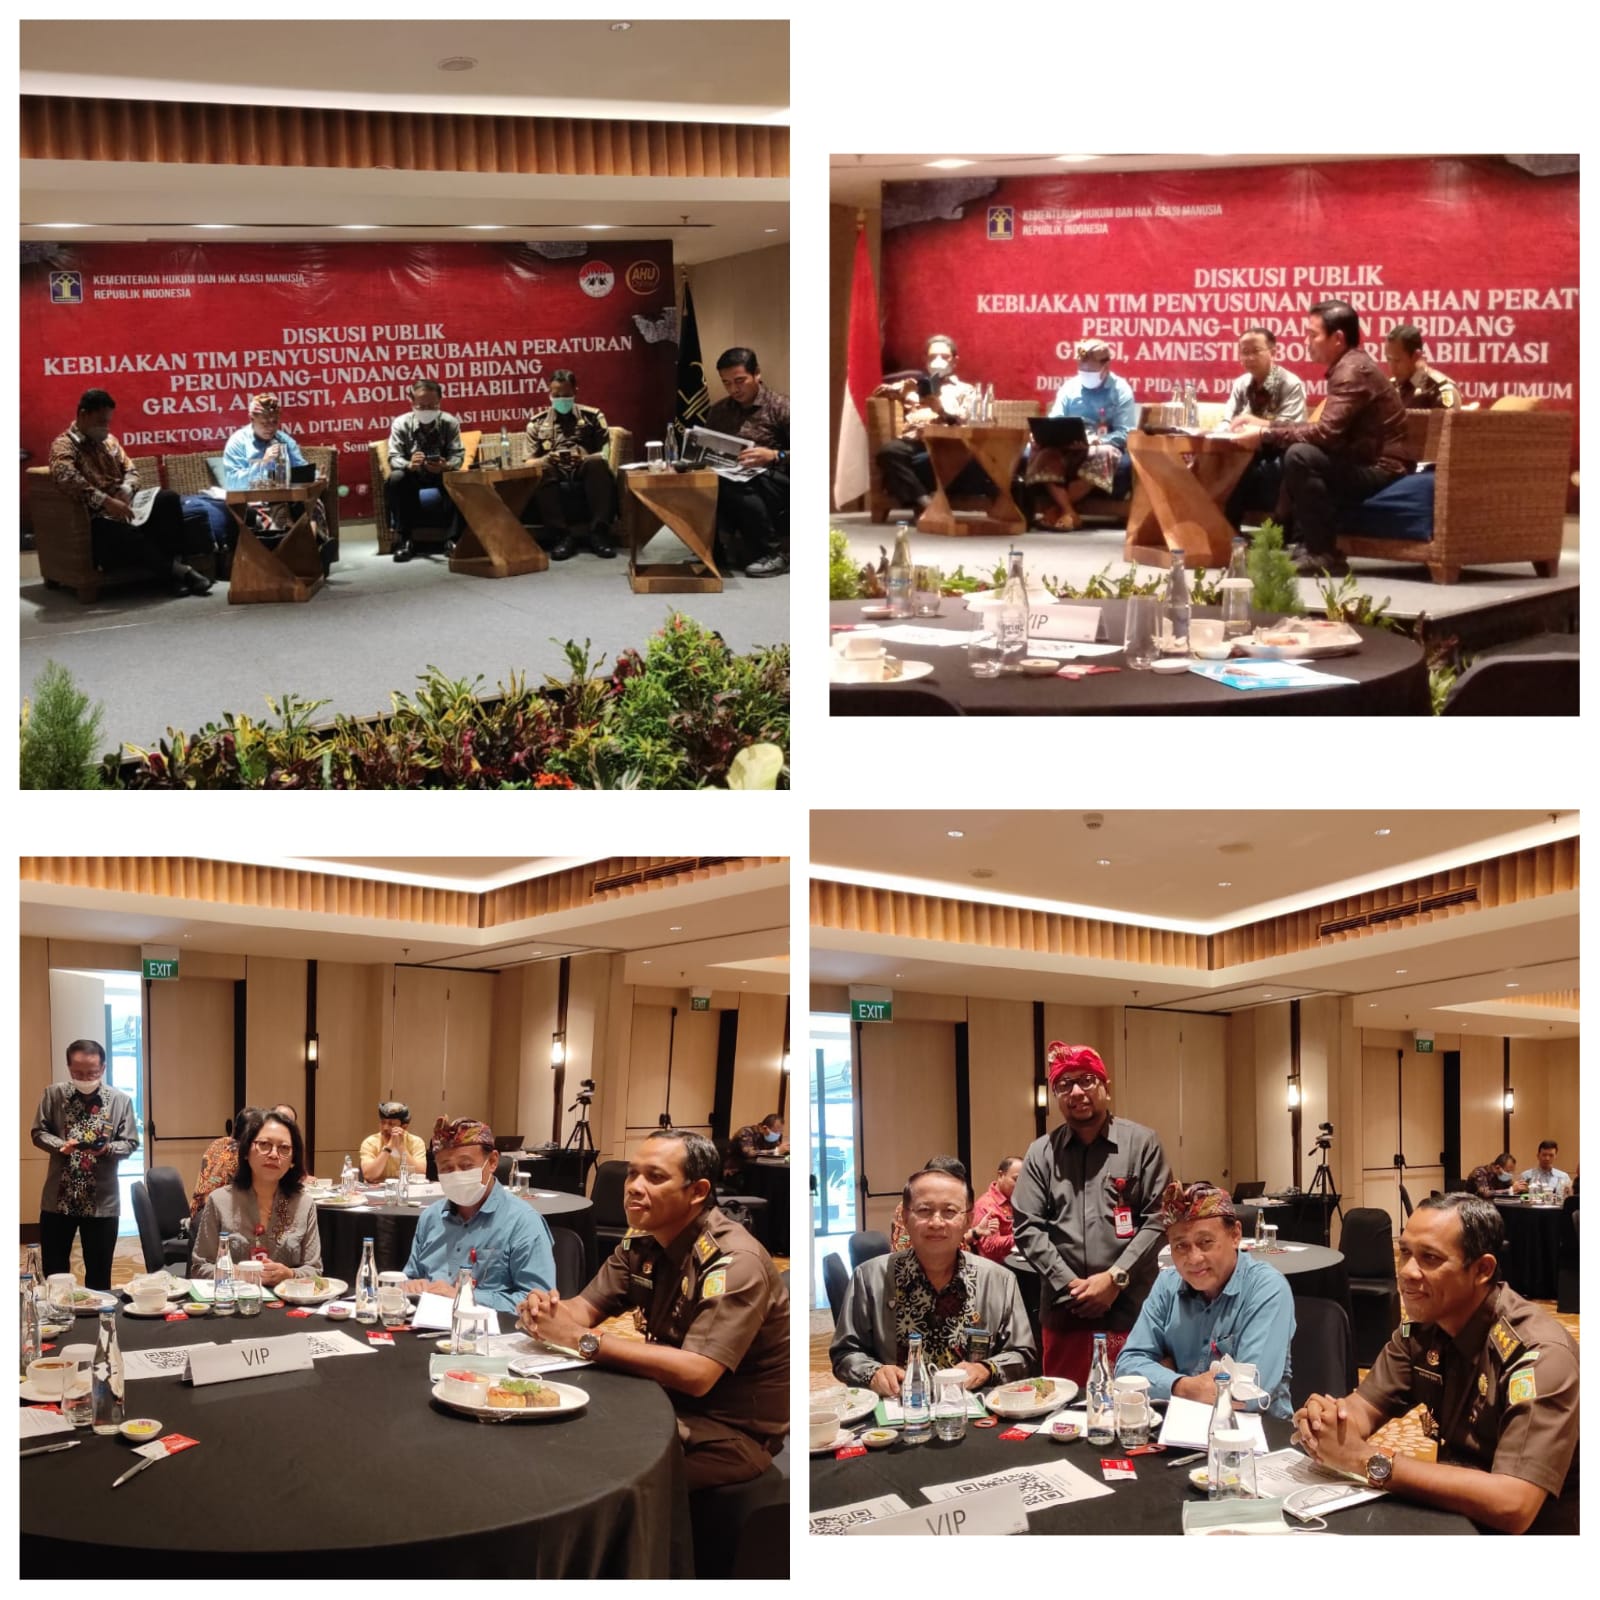 Dean of the Faculty of Law UNUD Becomes Resource Person for Public Discussion Organized by the Director General of General Legal Administration of the Ministry of Law and Human Rights of the Republic of Indonesia